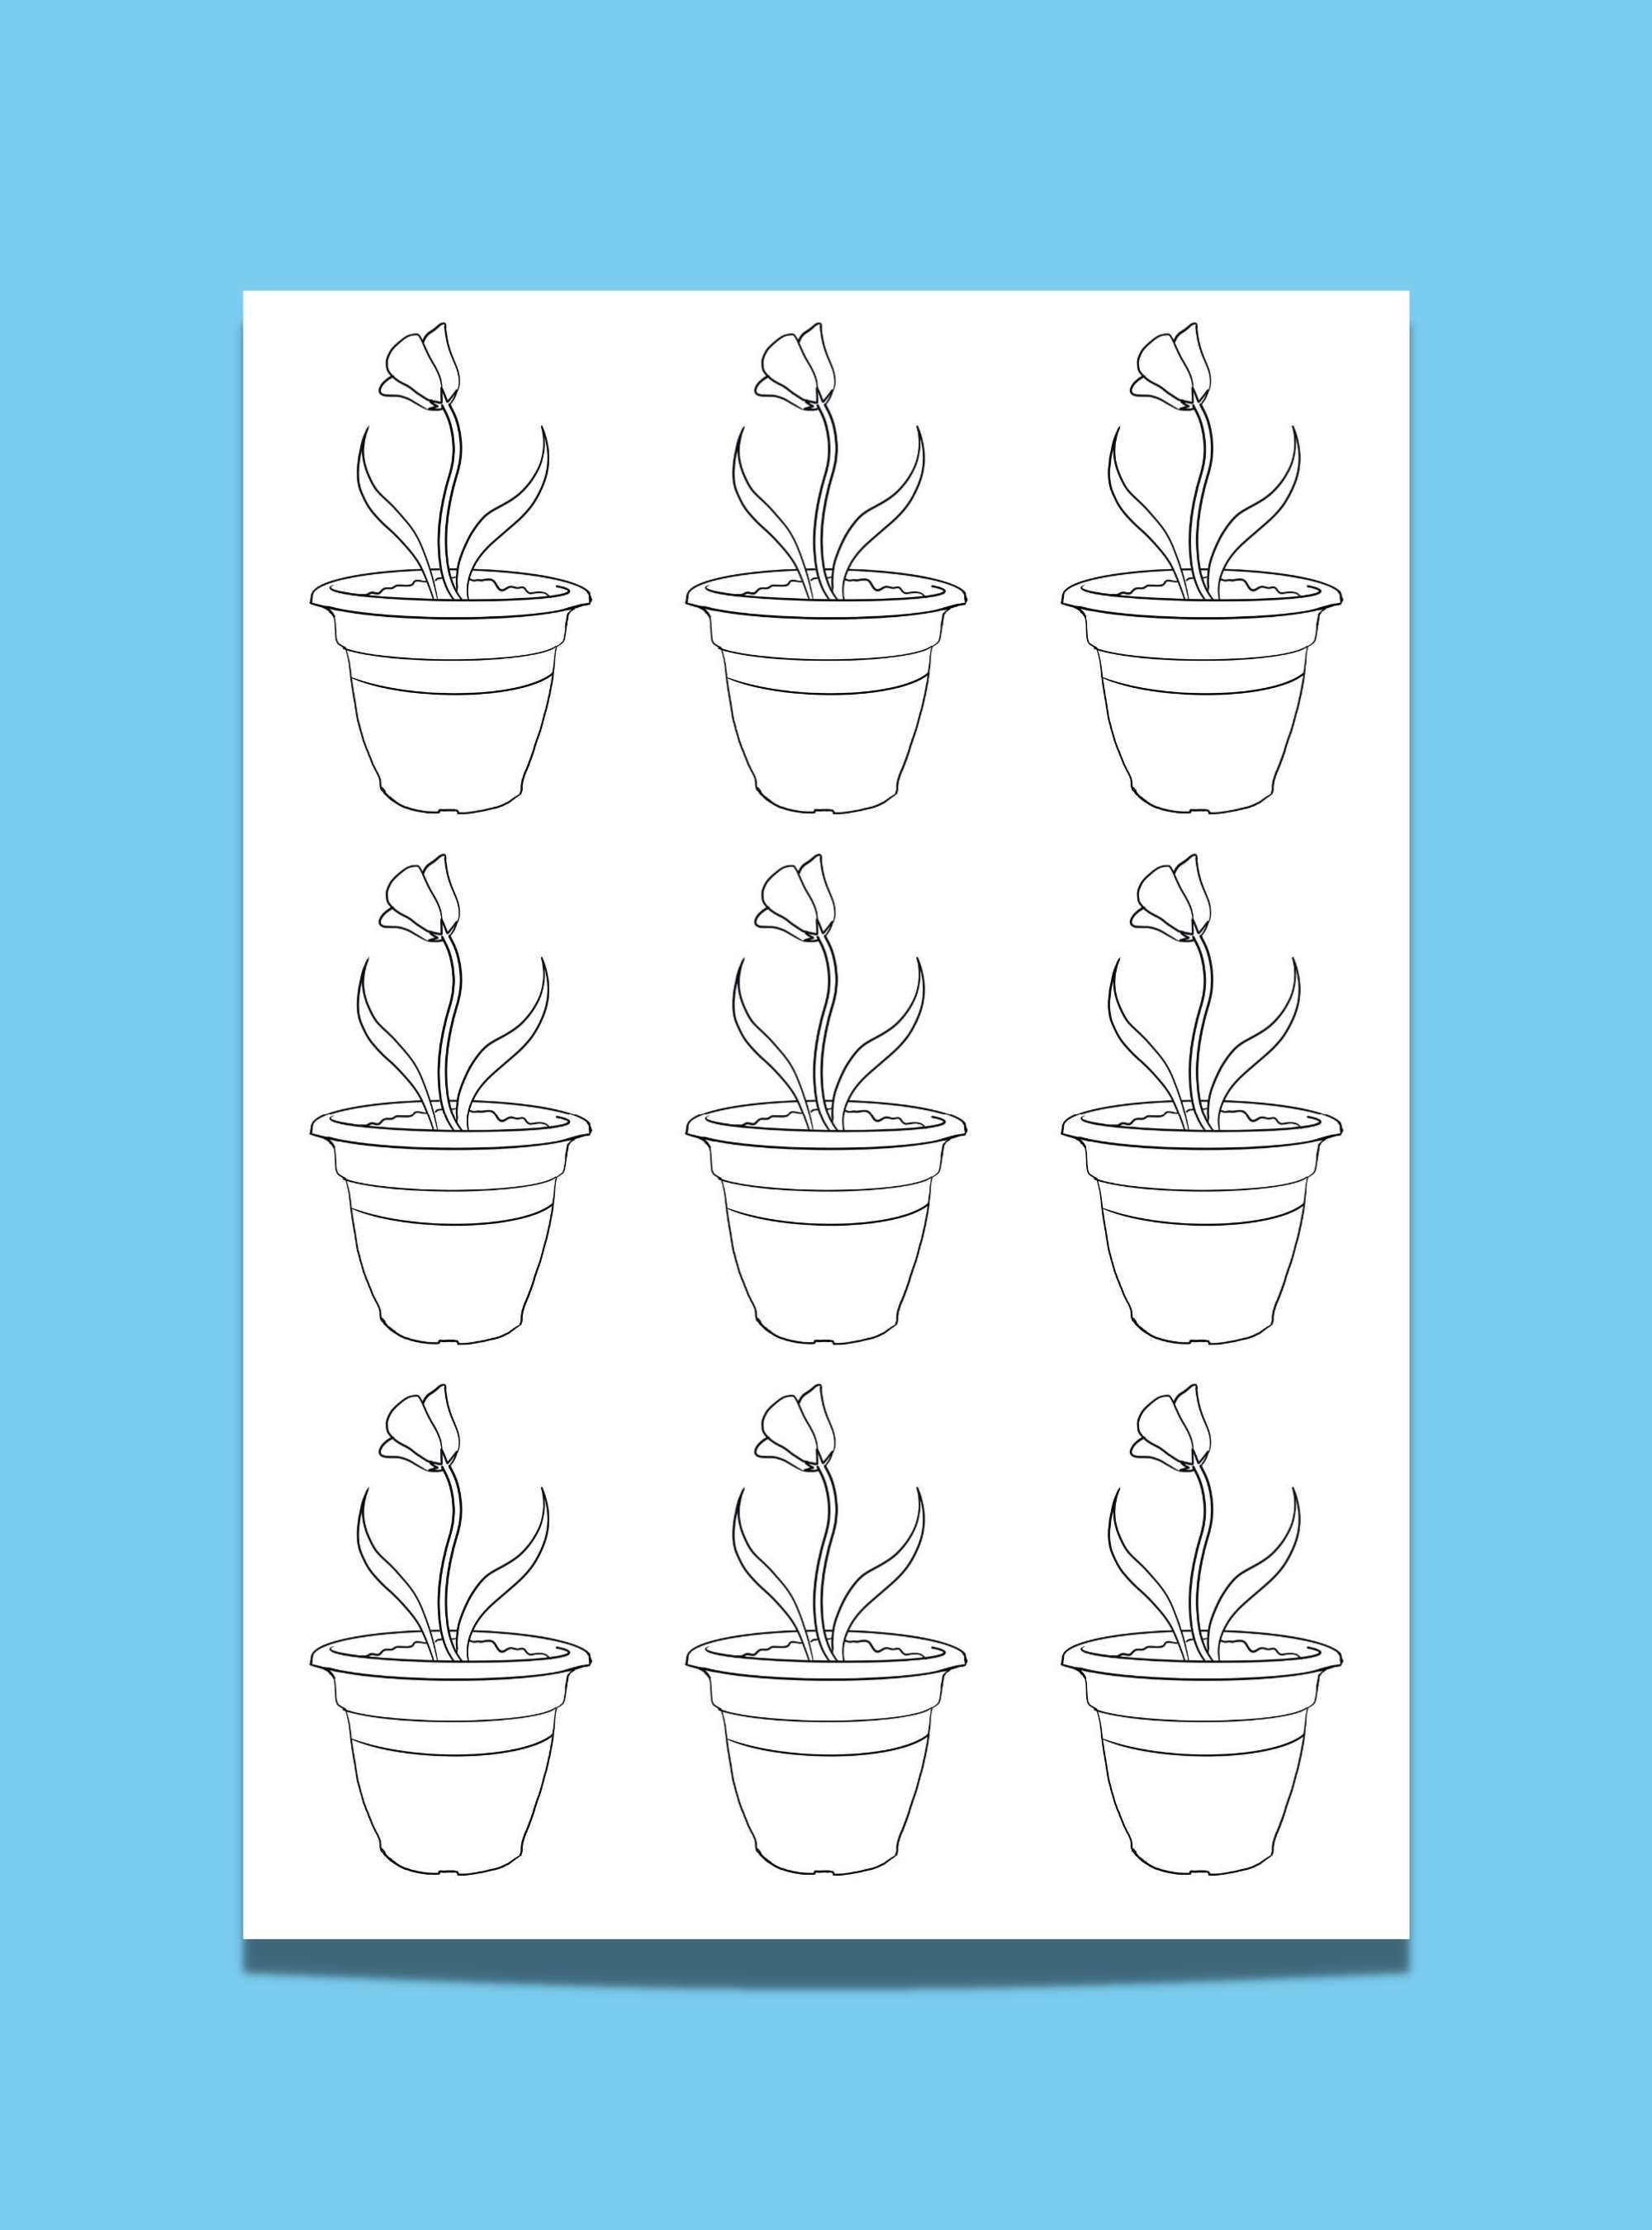 Get Ready to Bloom with Creativity! 13 Delightful Flower Pot Template